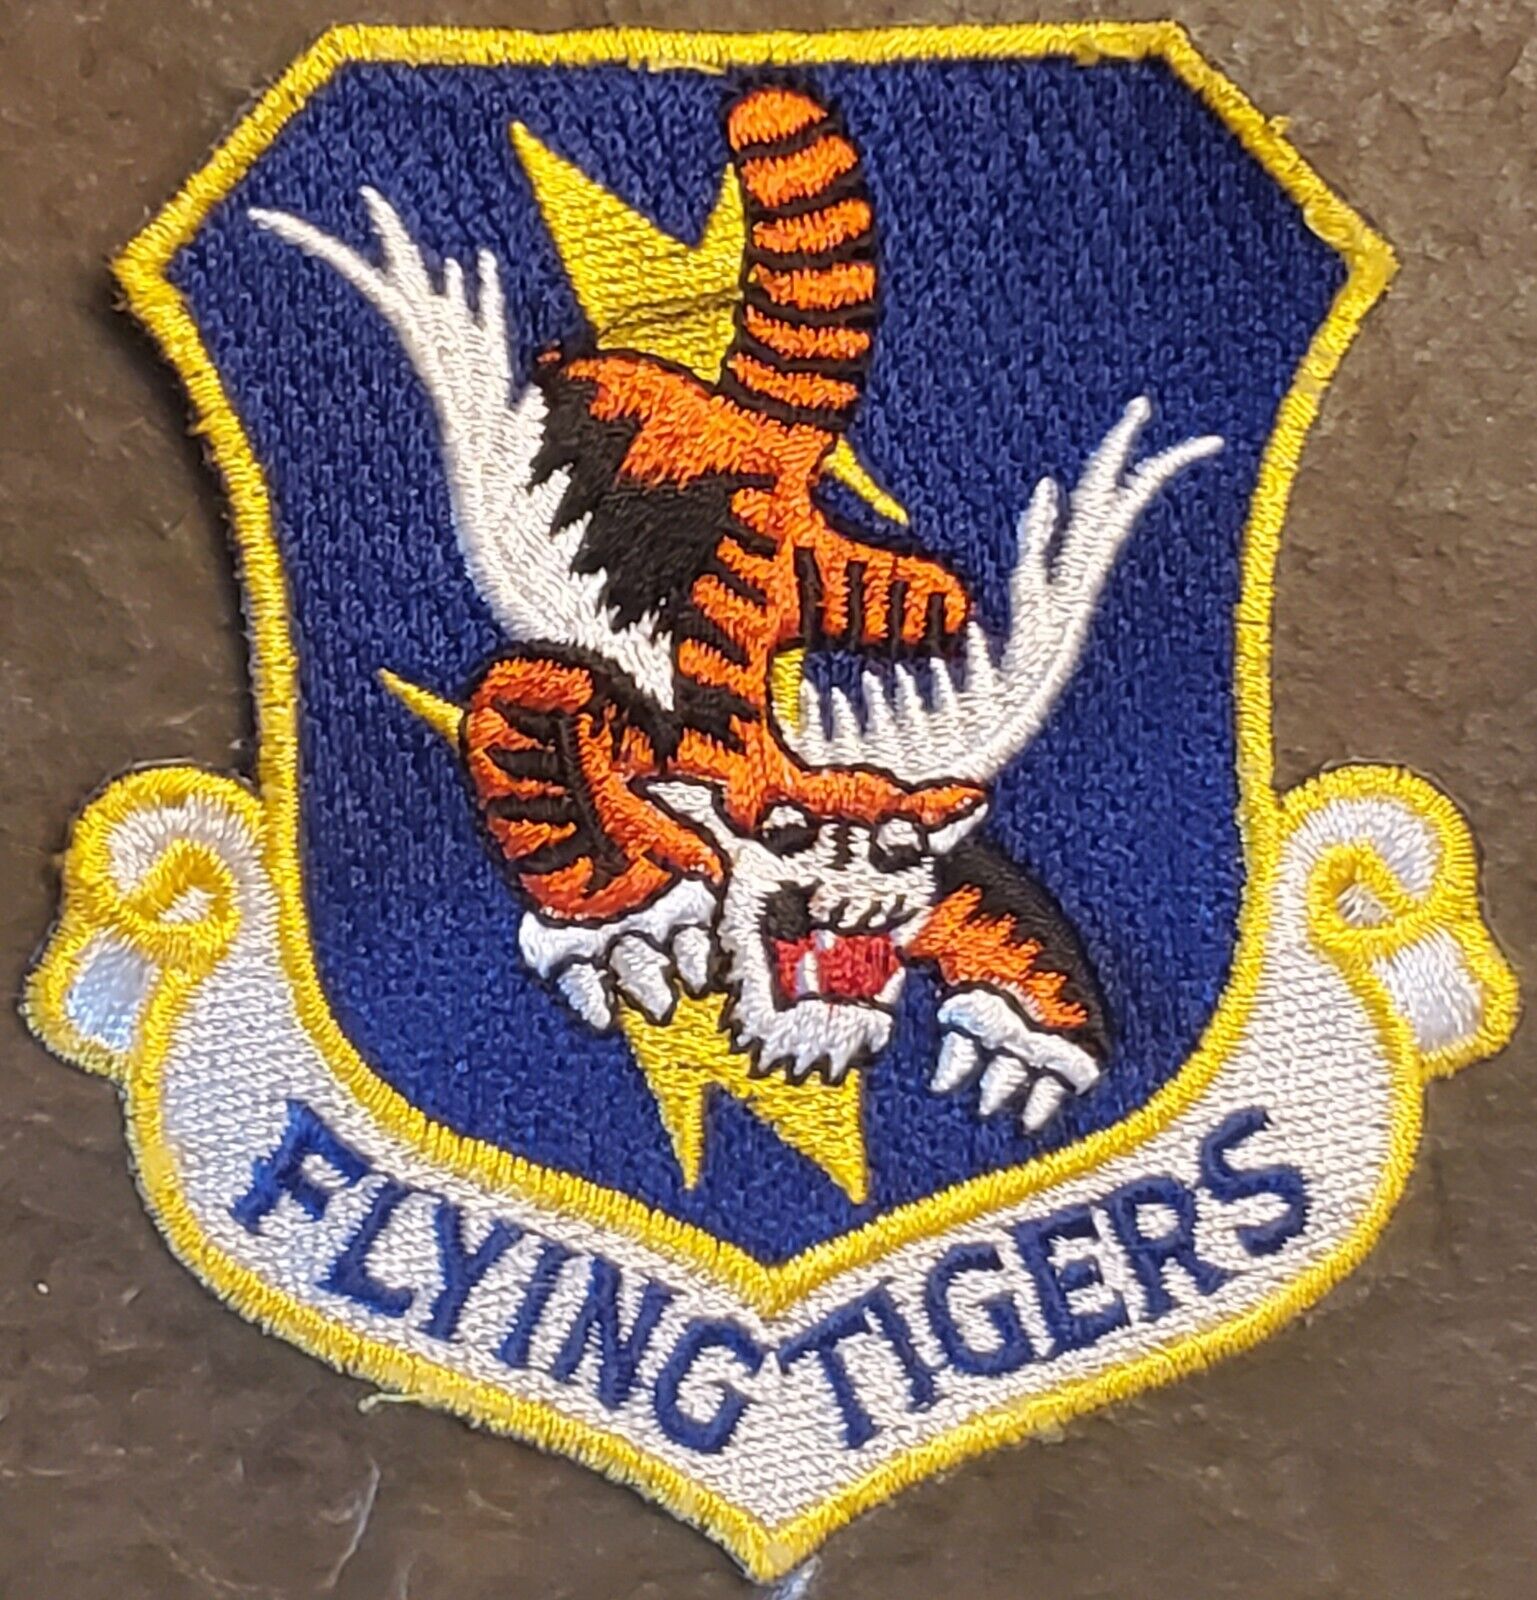 USAF 23rd TACTICAL FIGHTER WING MILITARY PATCH Color VTG Flight MOODY AFB, GA